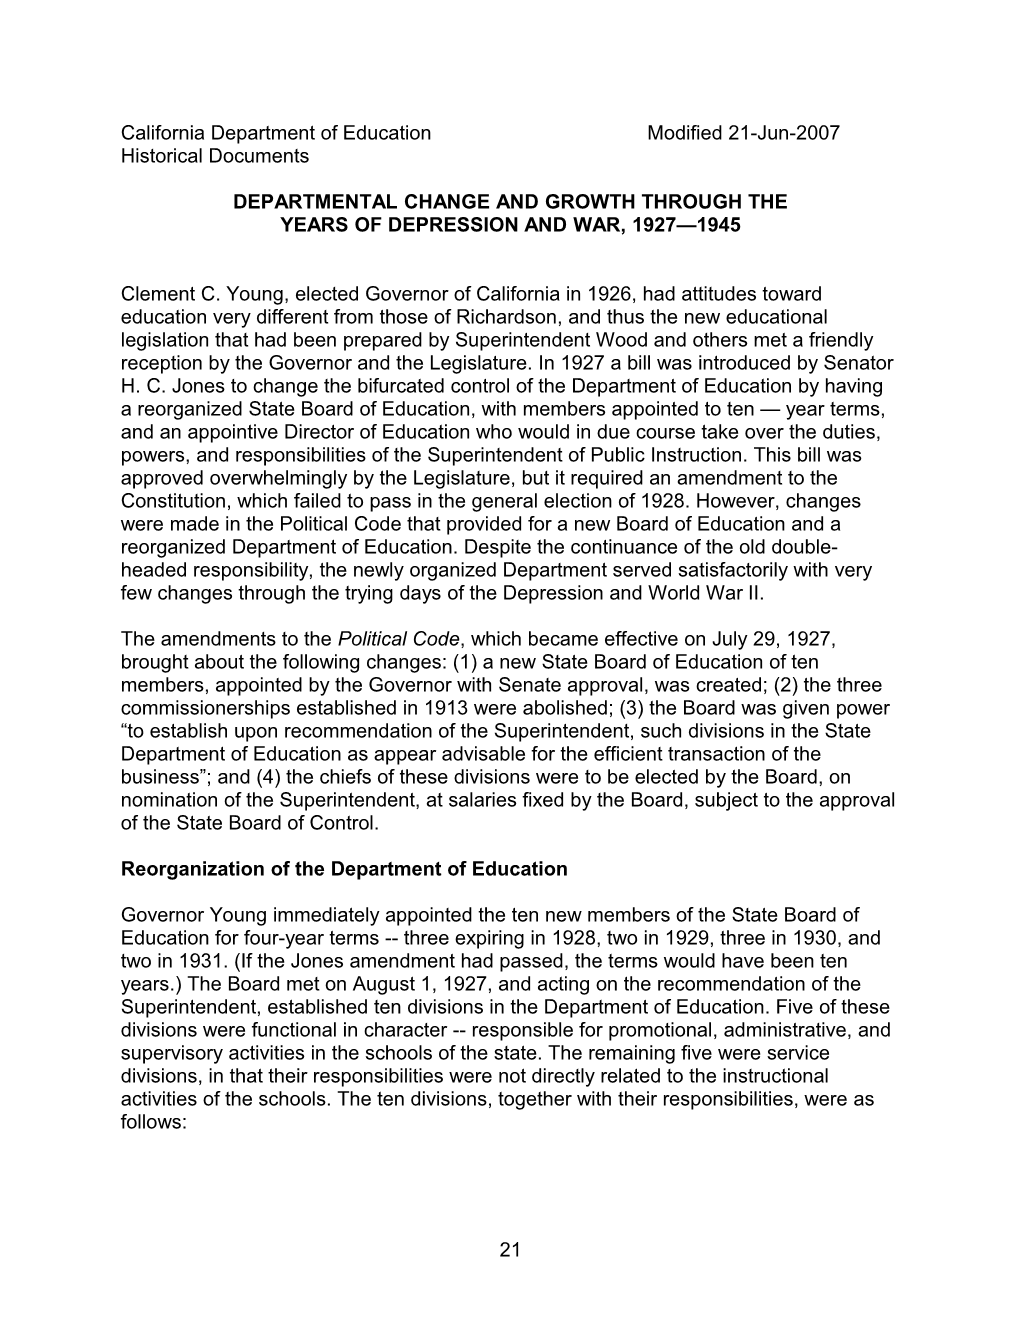 History of Education, Part E - Historical Documents (CA Dept of Education)